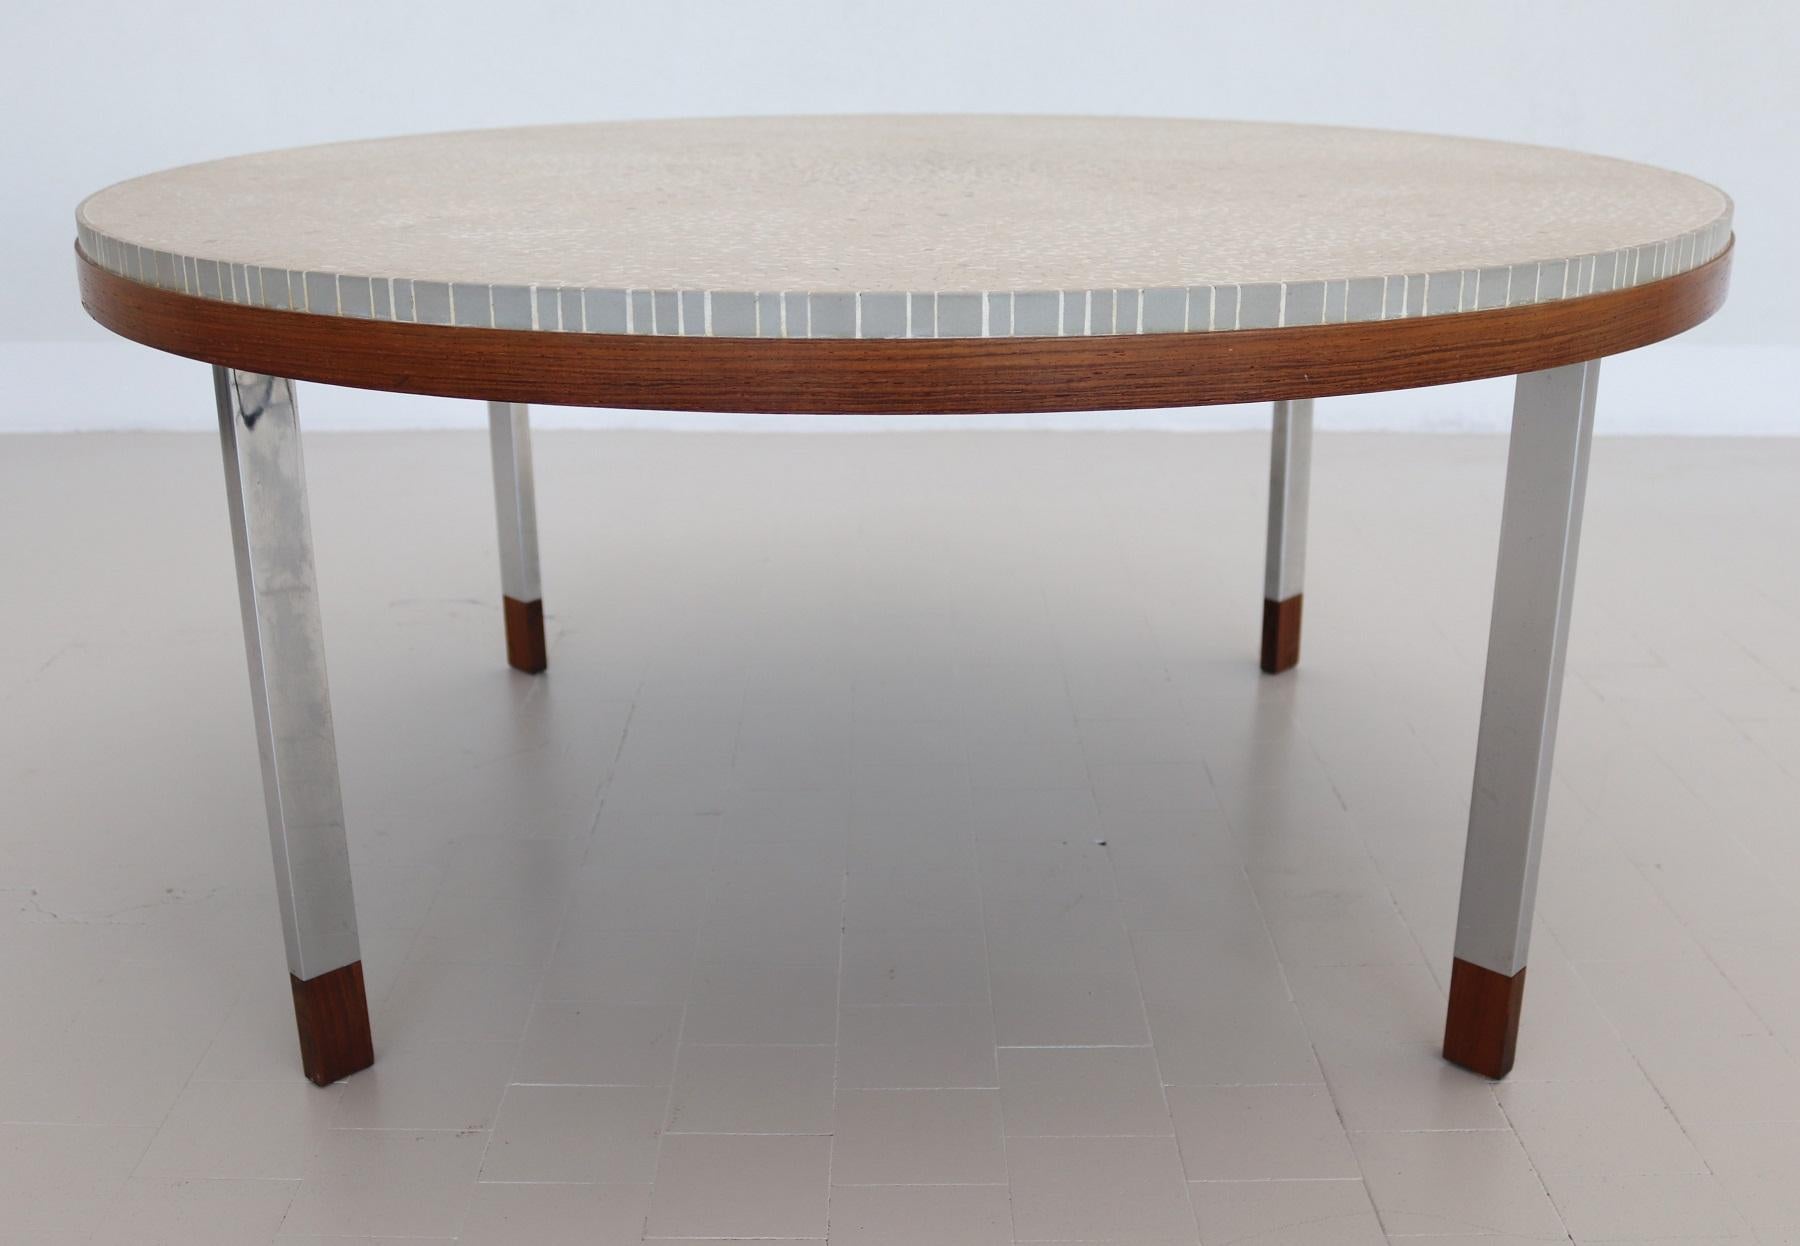 Stone Midcentury Mosaic Tile and Teak Coffee Table by Berthold Müller, 1960s For Sale